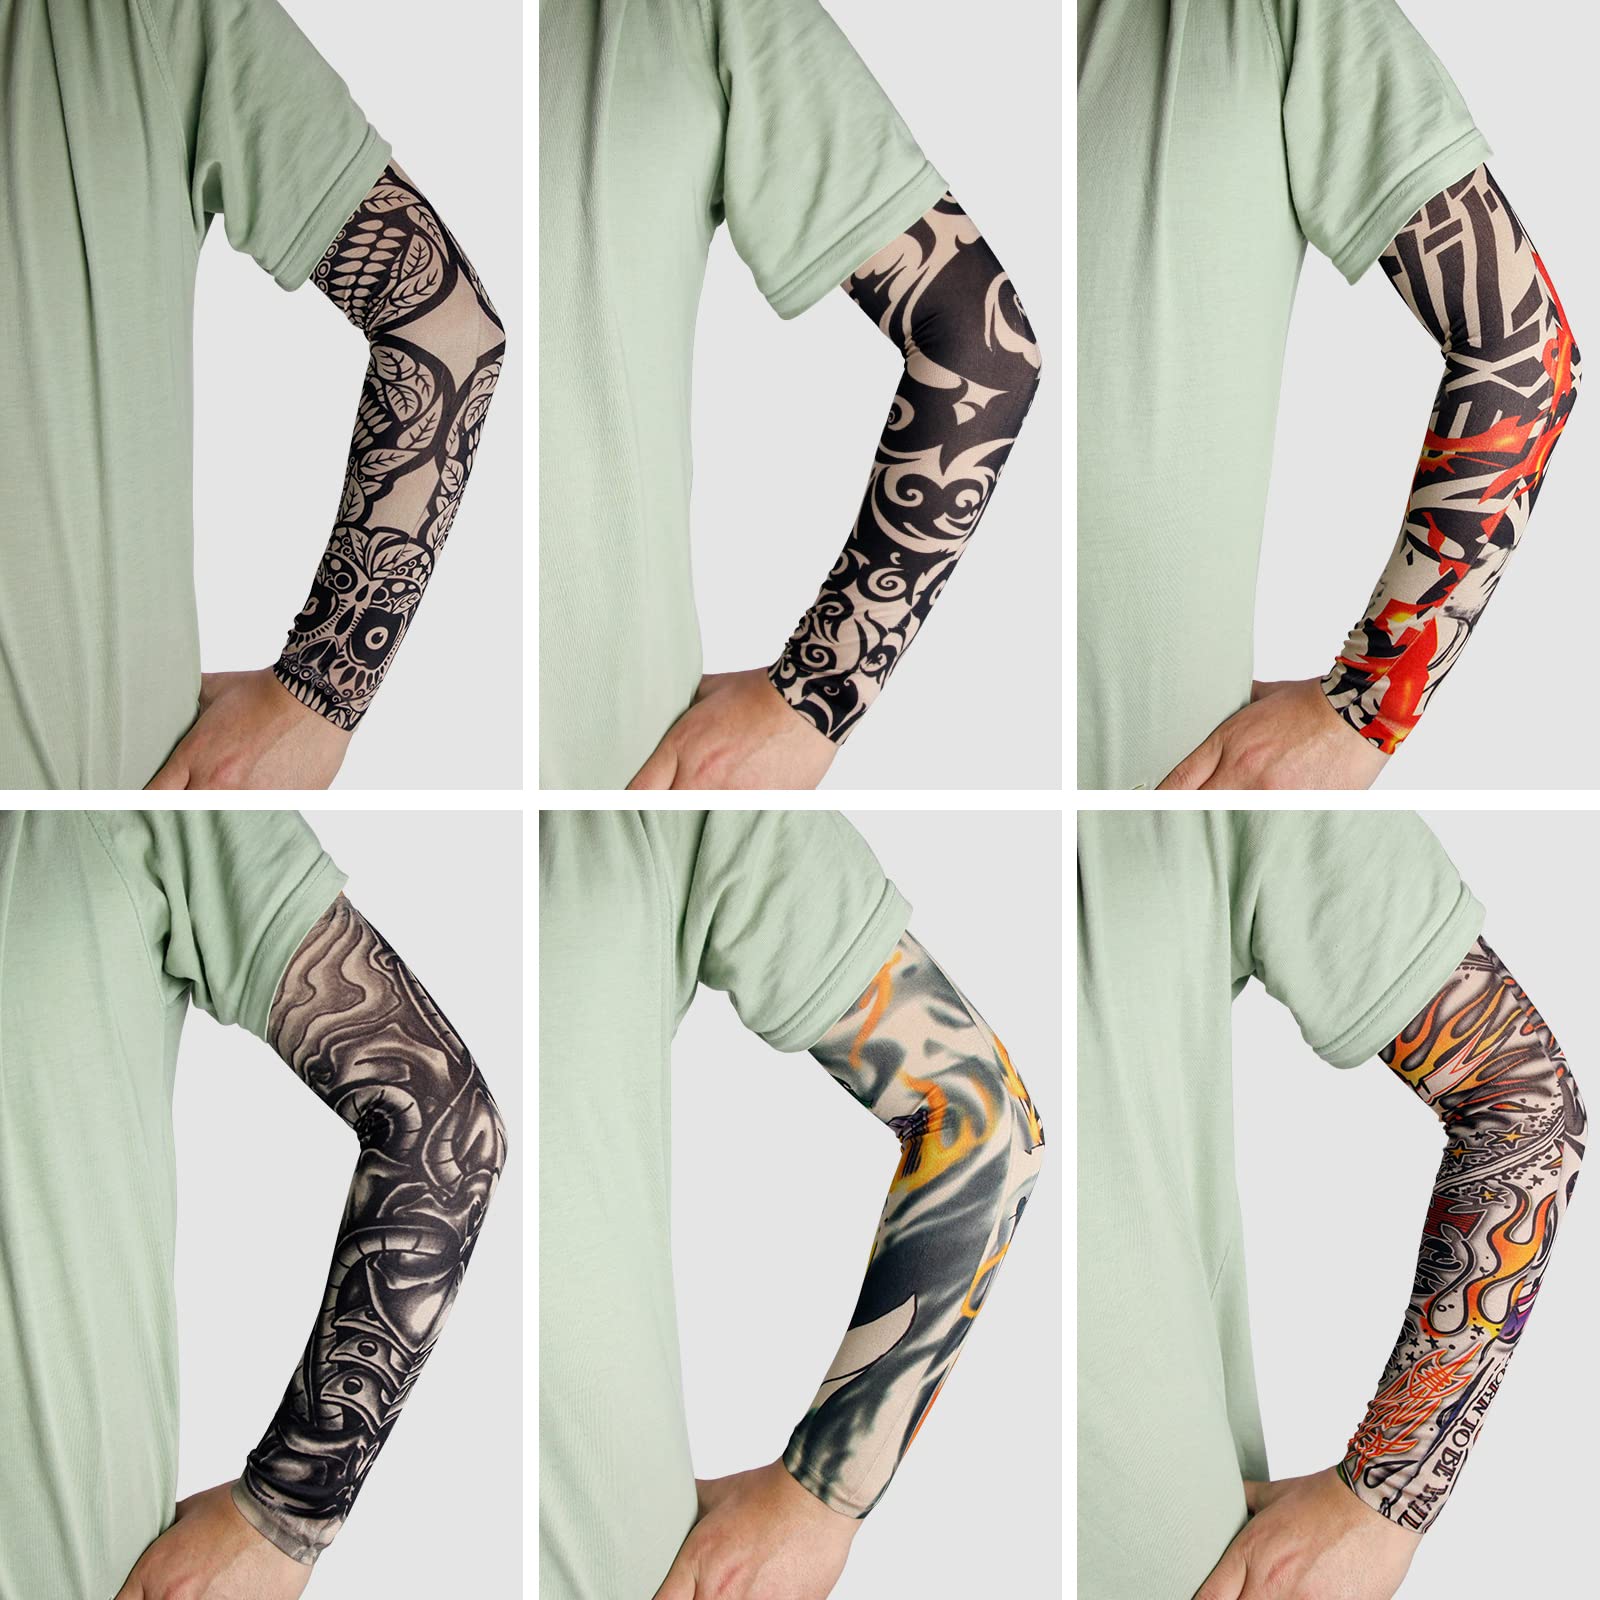 12 PCS Sports Arm Sleeves For Braces Splints & Slings , Tattoo Sleeve Seamless Hand Warmer Basketball & Activities , Outdoor Sunscreen Riding Cycling Elbow Braces For Boys , Men , Women Color Ramdoml